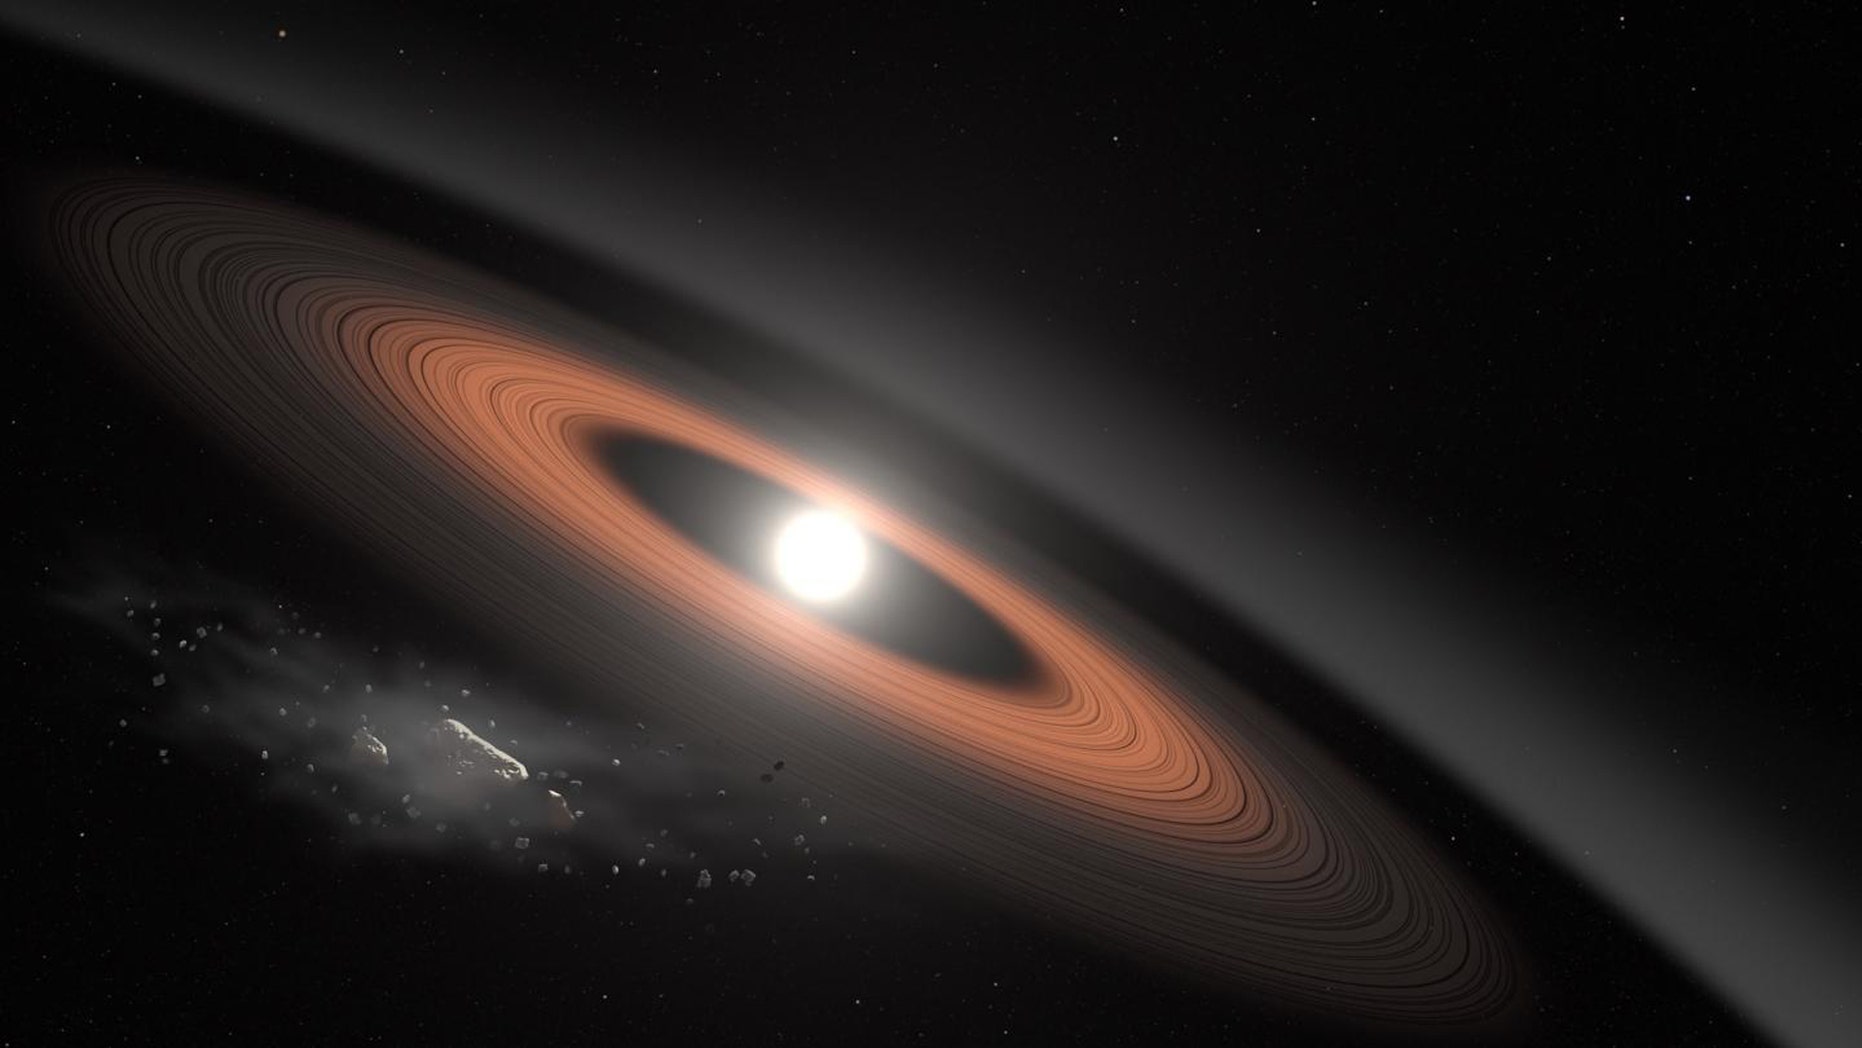 The star, called LSPM J0207 + 3331, is the oldest and coolest white dwarf known to be surrounded by a dusty debris ring. This illustration describes the ring with two separate components, which, according to scientists, best explains the system's infrared signal and an asteroid broken by the gravity of the white dwarf. (NASA Goddard Space Flight Center / Scott Wiessinger)